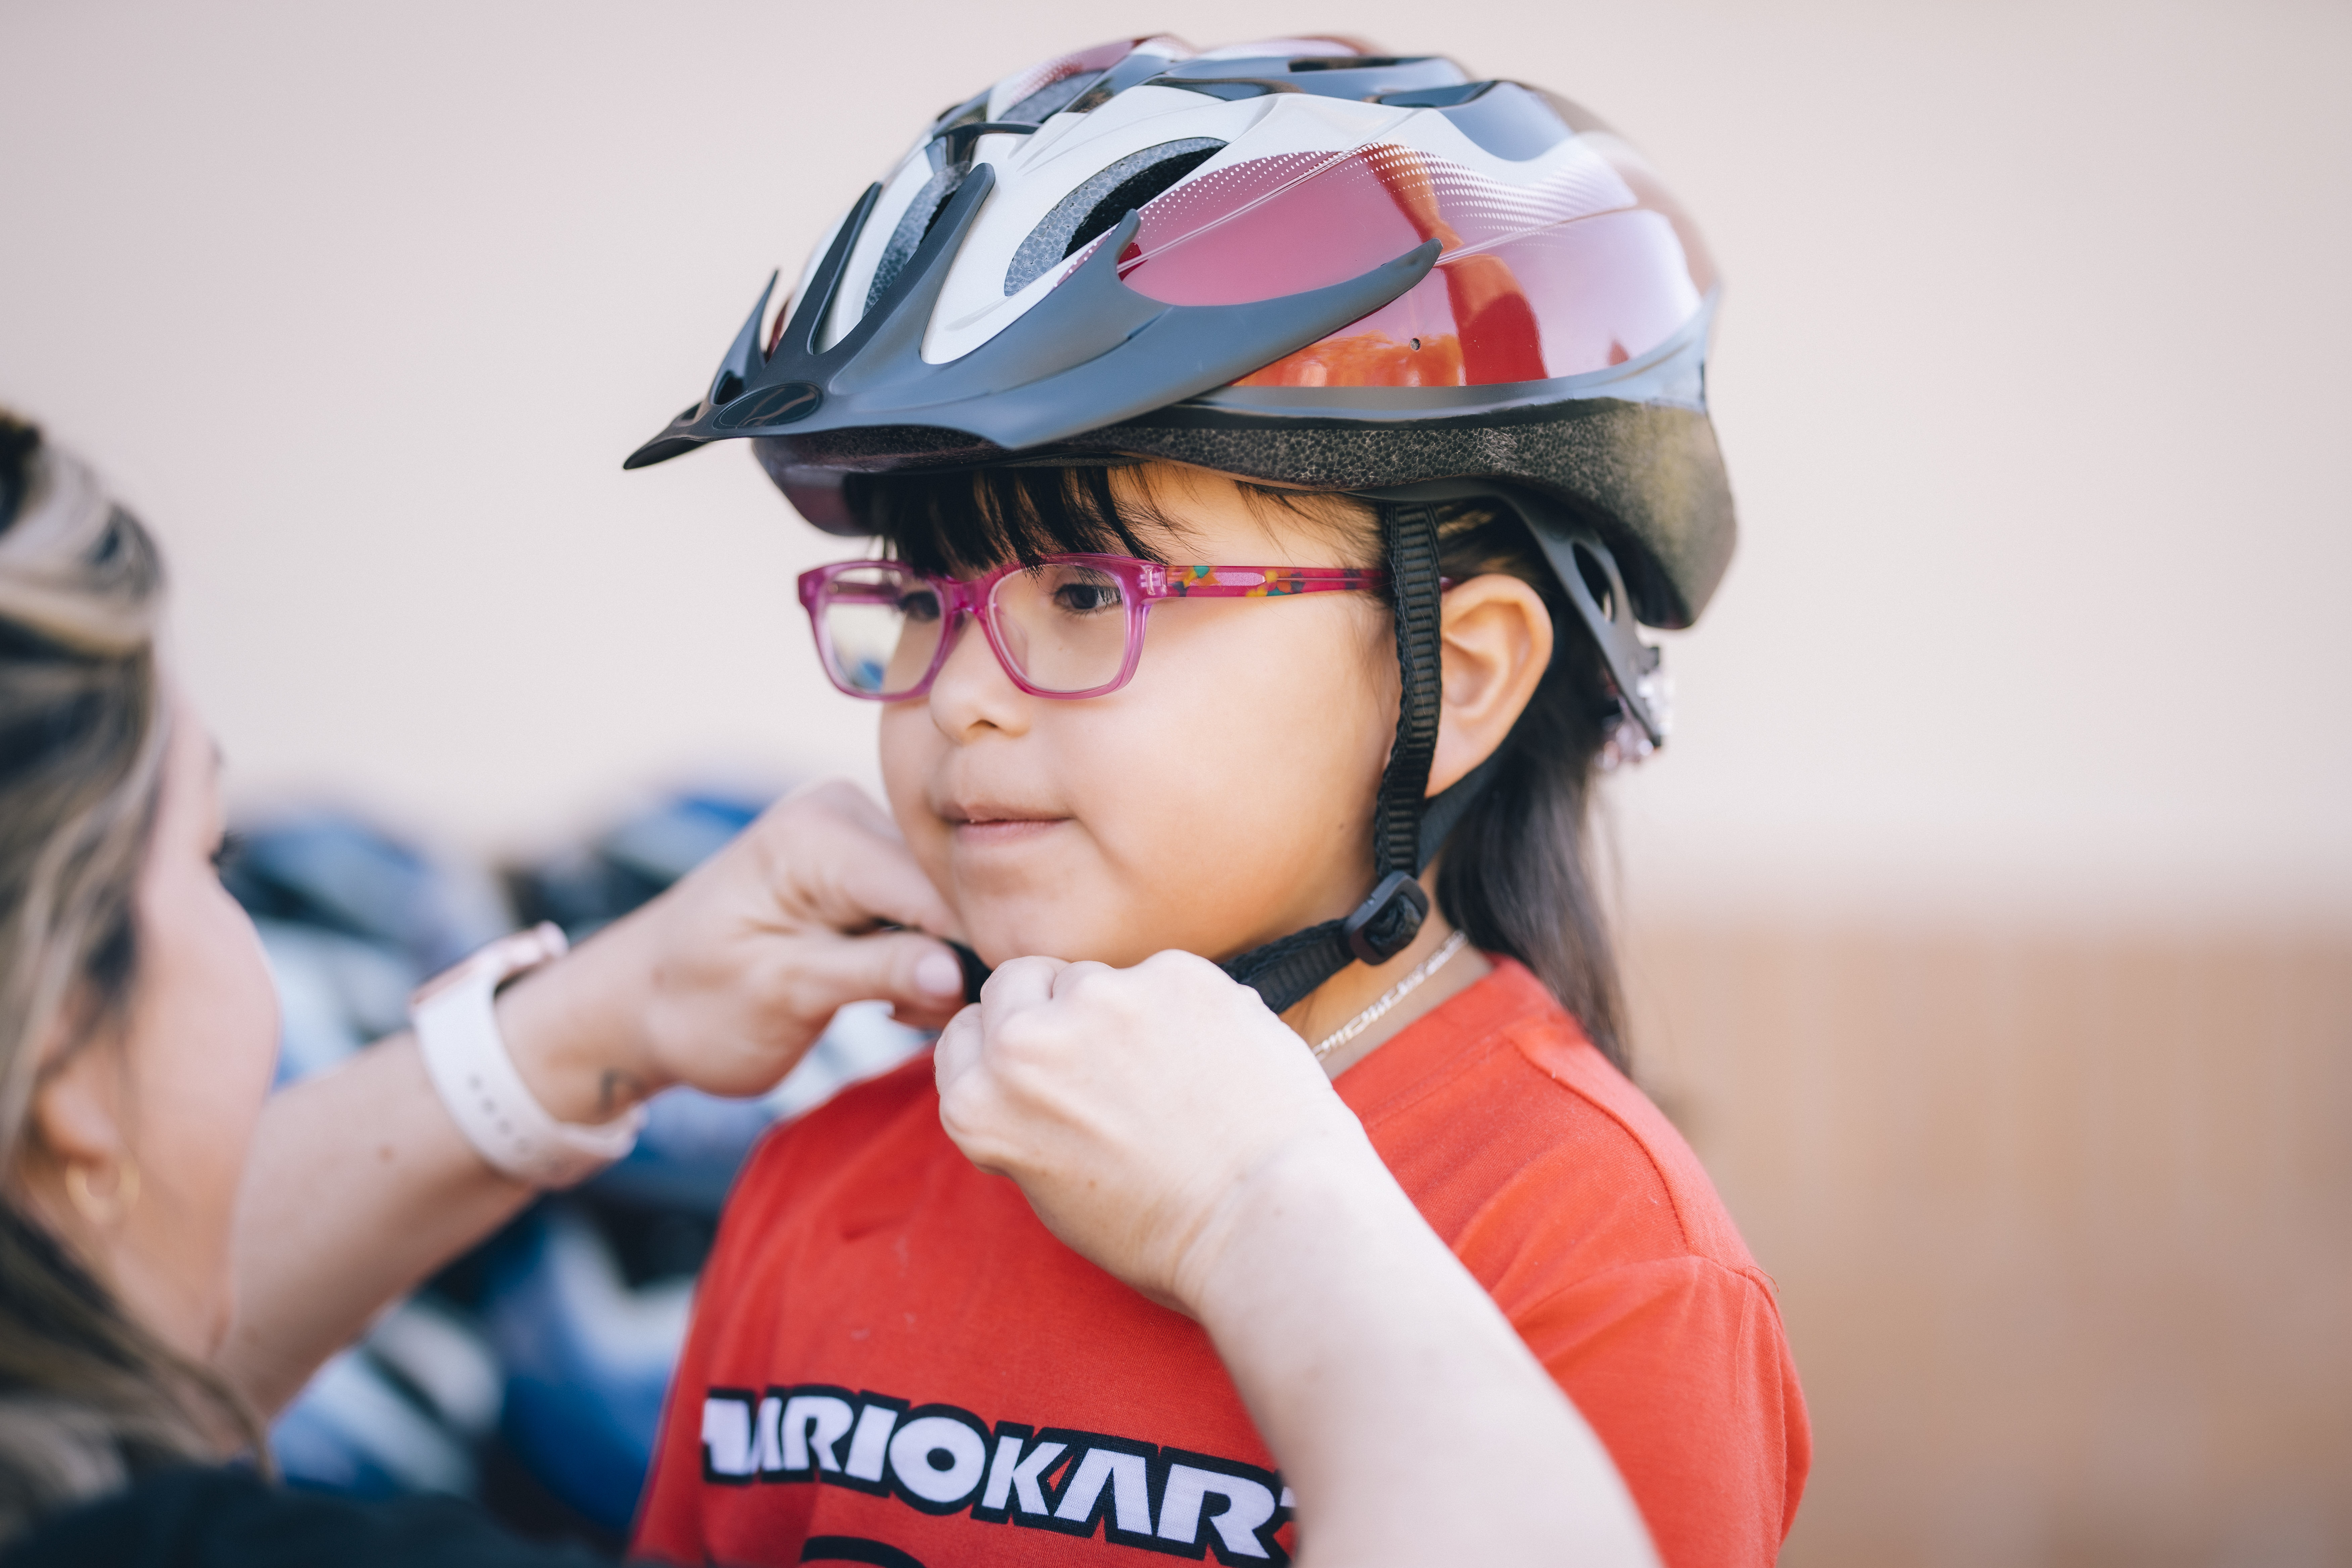 Child being fitted for a new helmet at the Phoenix Children's Bike Rodeo